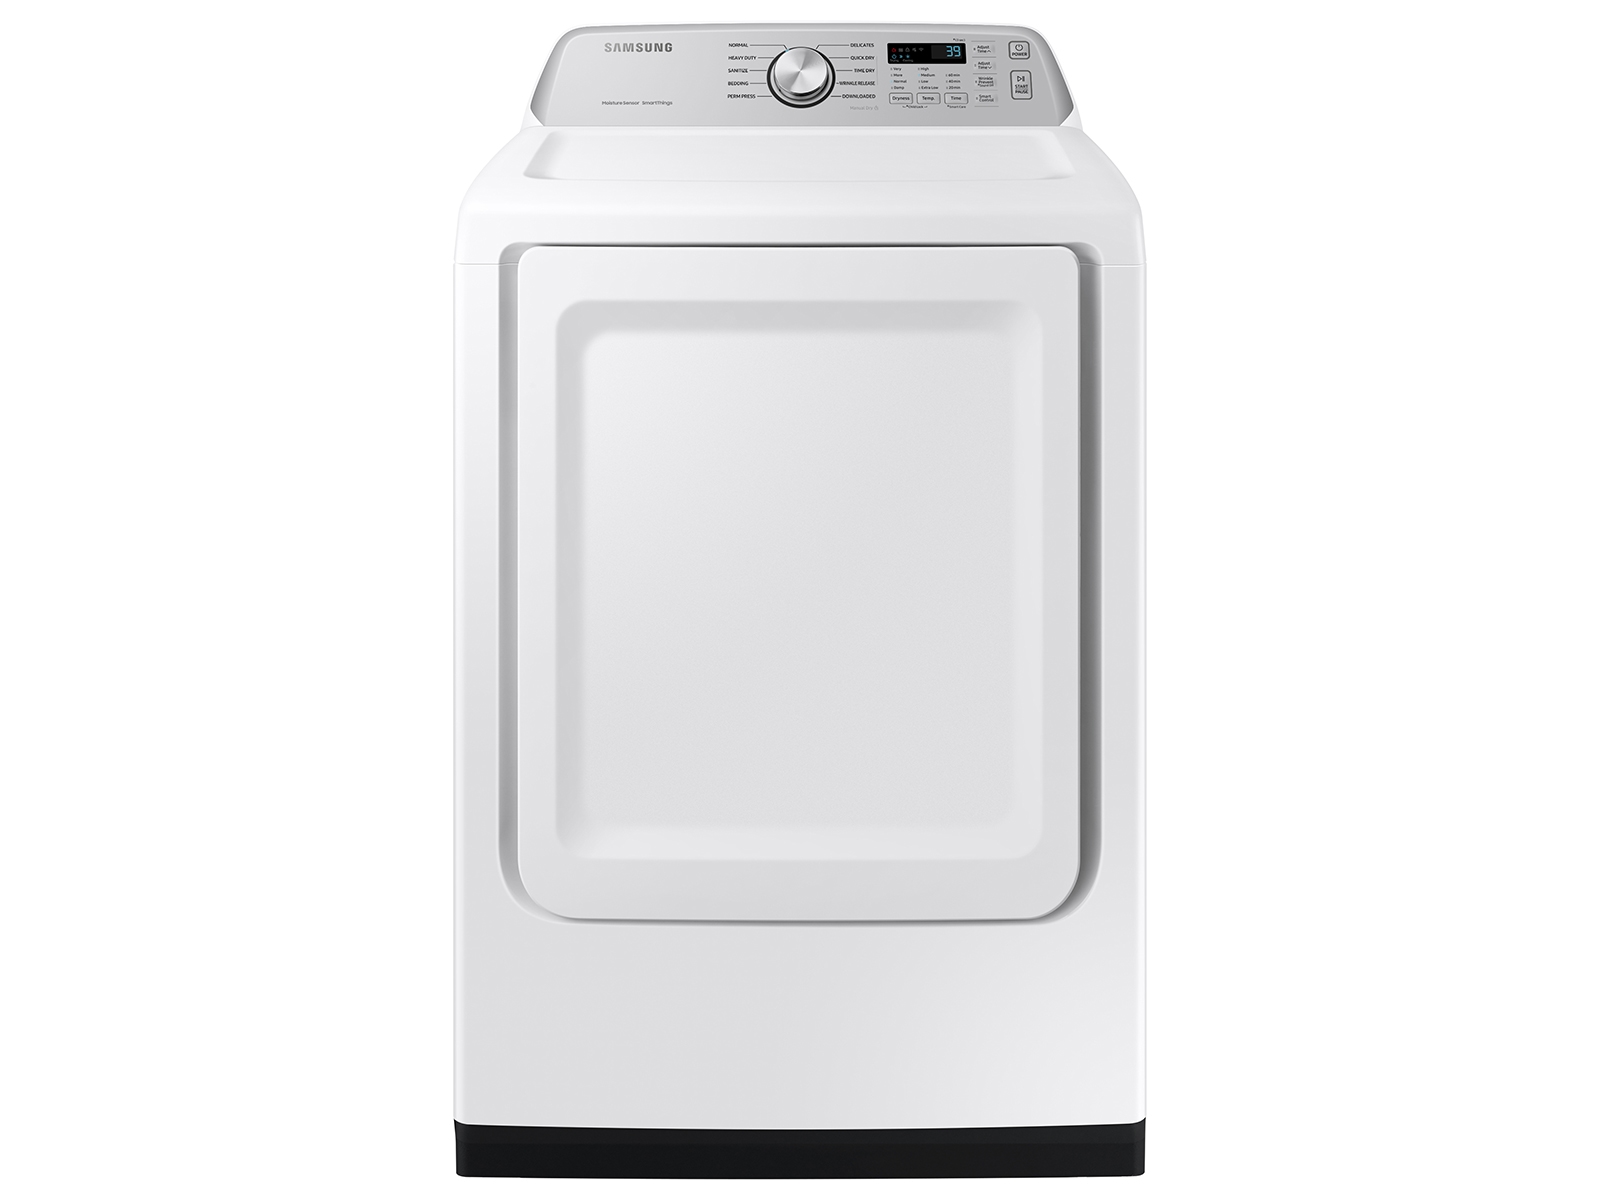 Photos - Tumble Dryer Samsung 7.4 cu. ft. Smart Gas Dryer with Sensor Dry in White(DVG47CG3500WA 